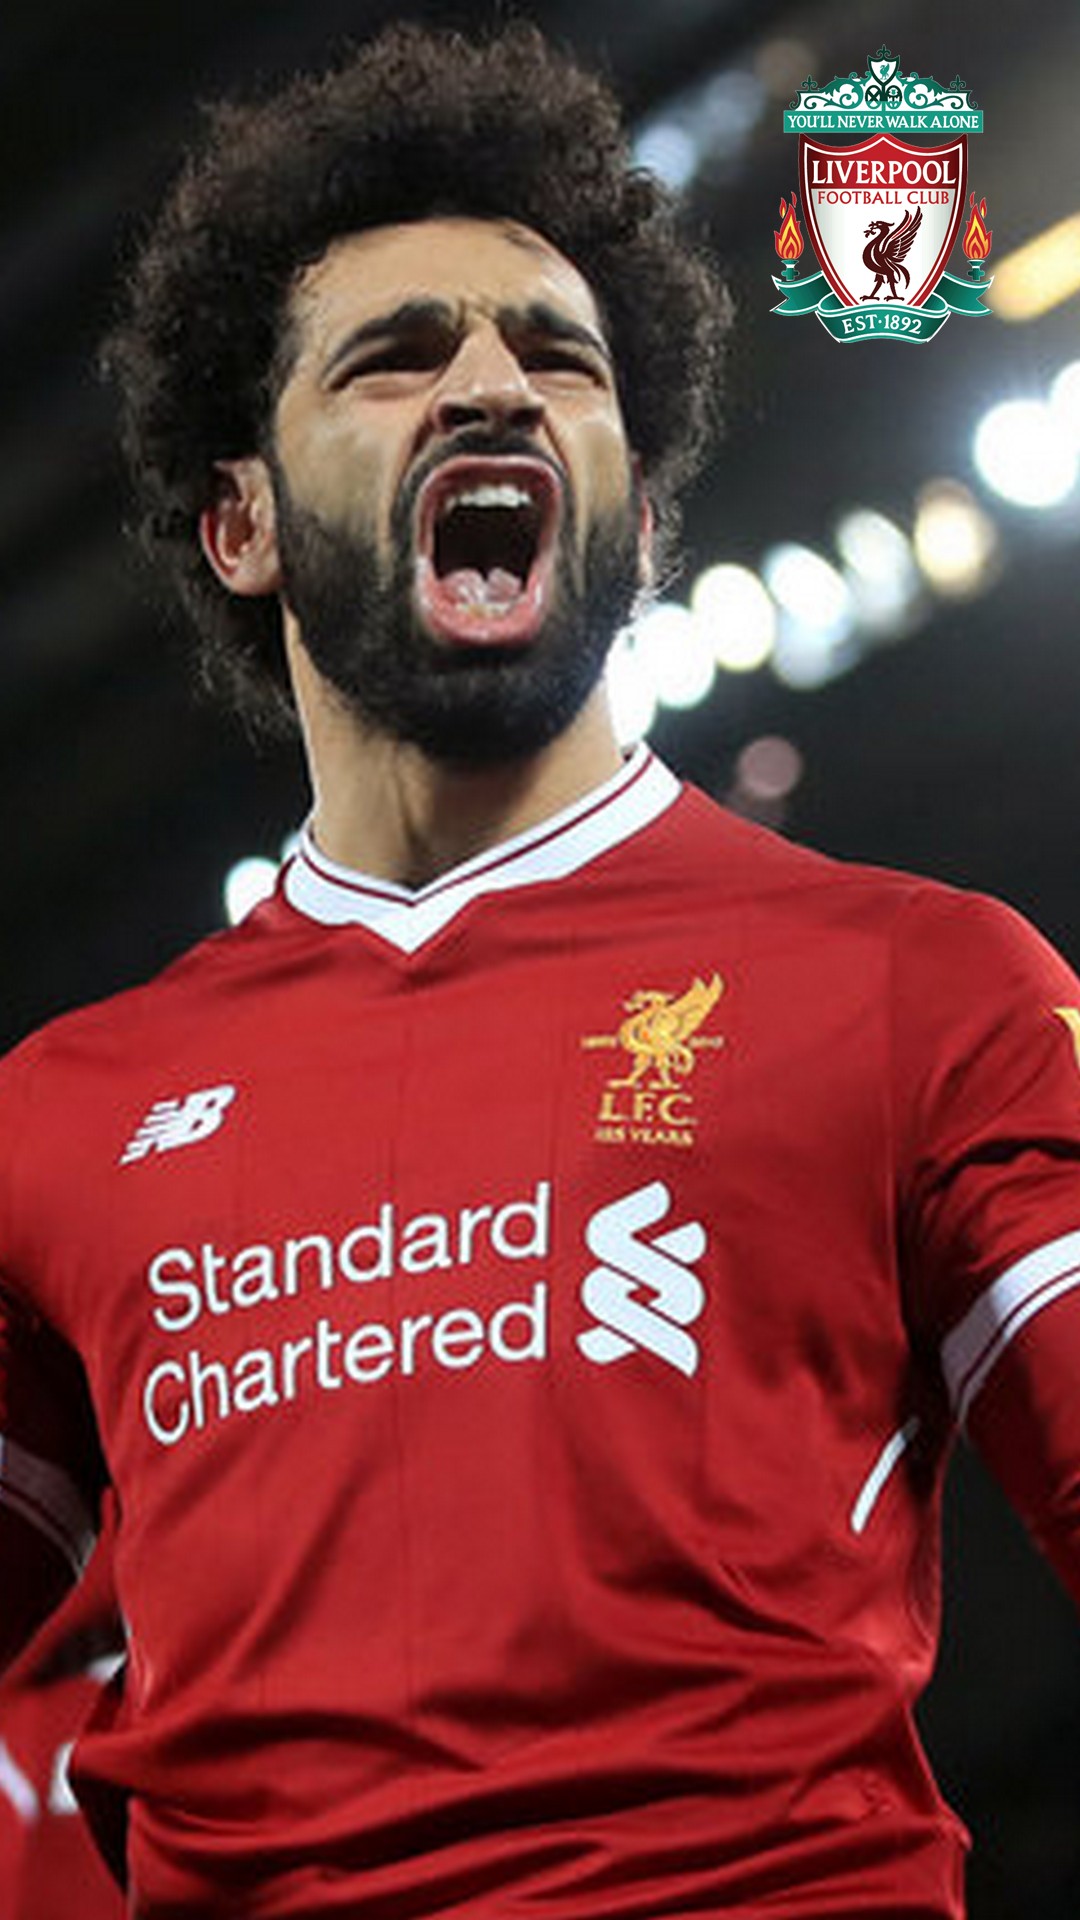 Mohamed Salah Android Wallpaper with resolution 1080X1920 pixel. You can make this wallpaper for your Android backgrounds, Tablet, Smartphones Screensavers and Mobile Phone Lock Screen